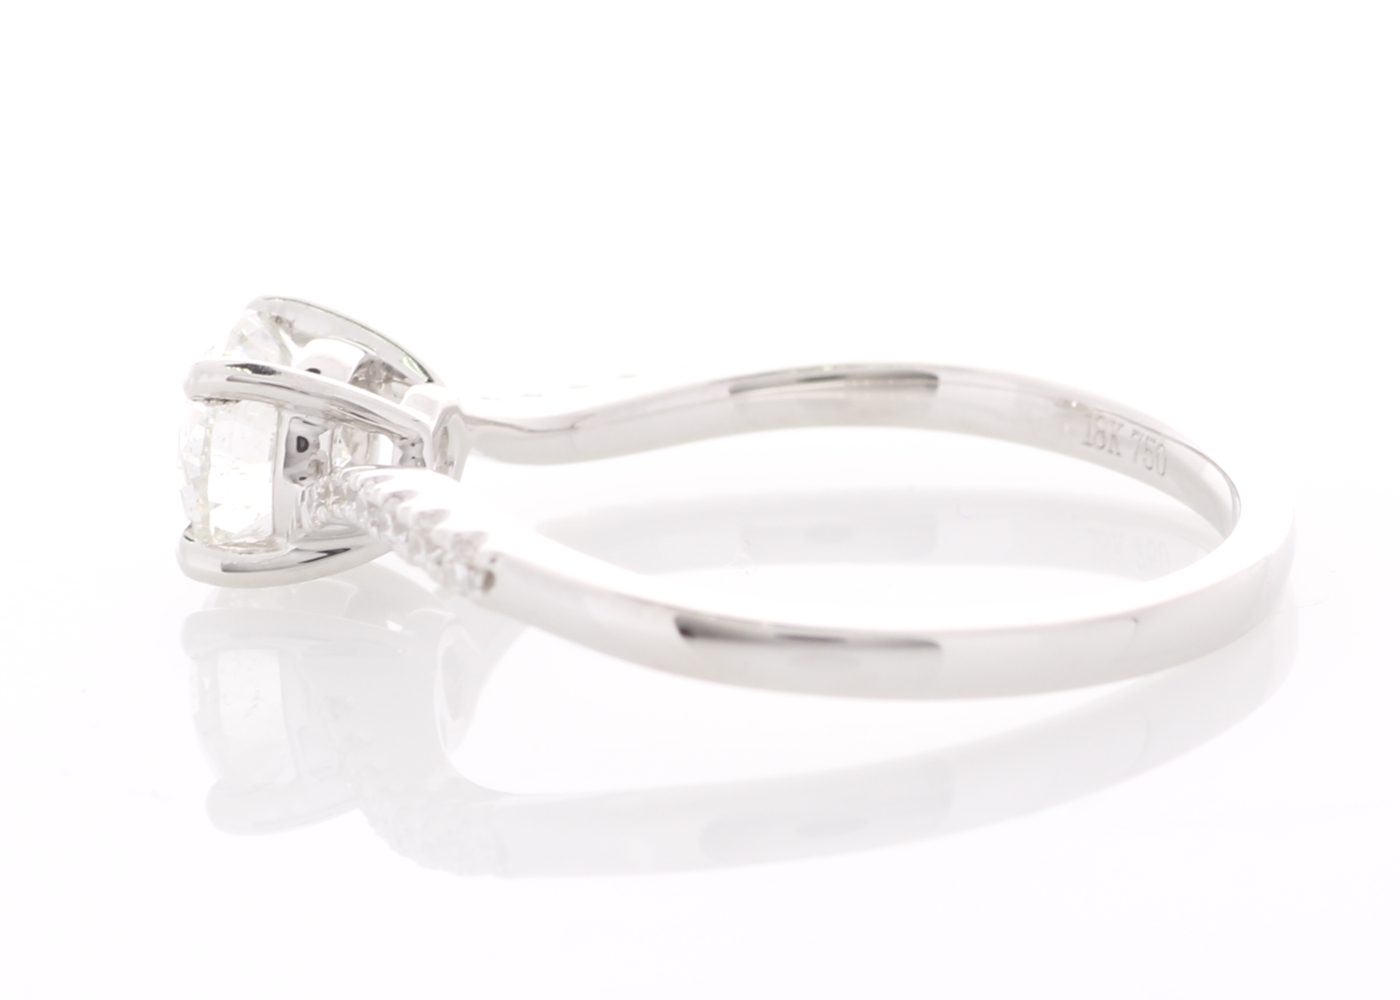 18ct White Gold Prong Set With Stone Set Shoulders Diamond Ring 0.73 Carats - Image 2 of 6